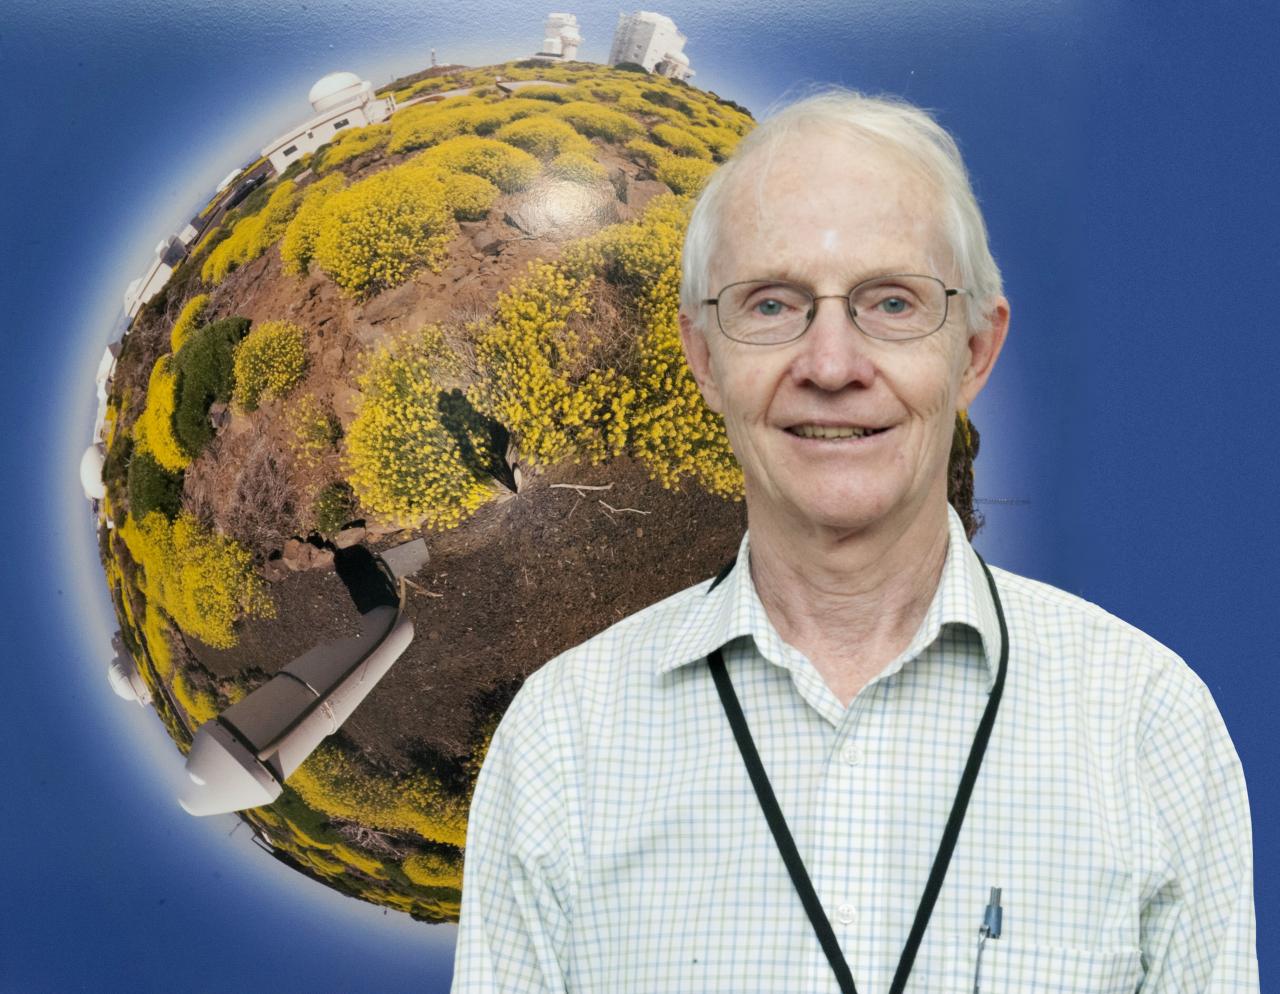 Phil Gregory, Emeritus Professor of the University of British Columbia, one of the lecturers at the XXVI Winter School of the Astrophysics Institute of the Canaries. Credit: Miguel Briganti, SMM (IAC).